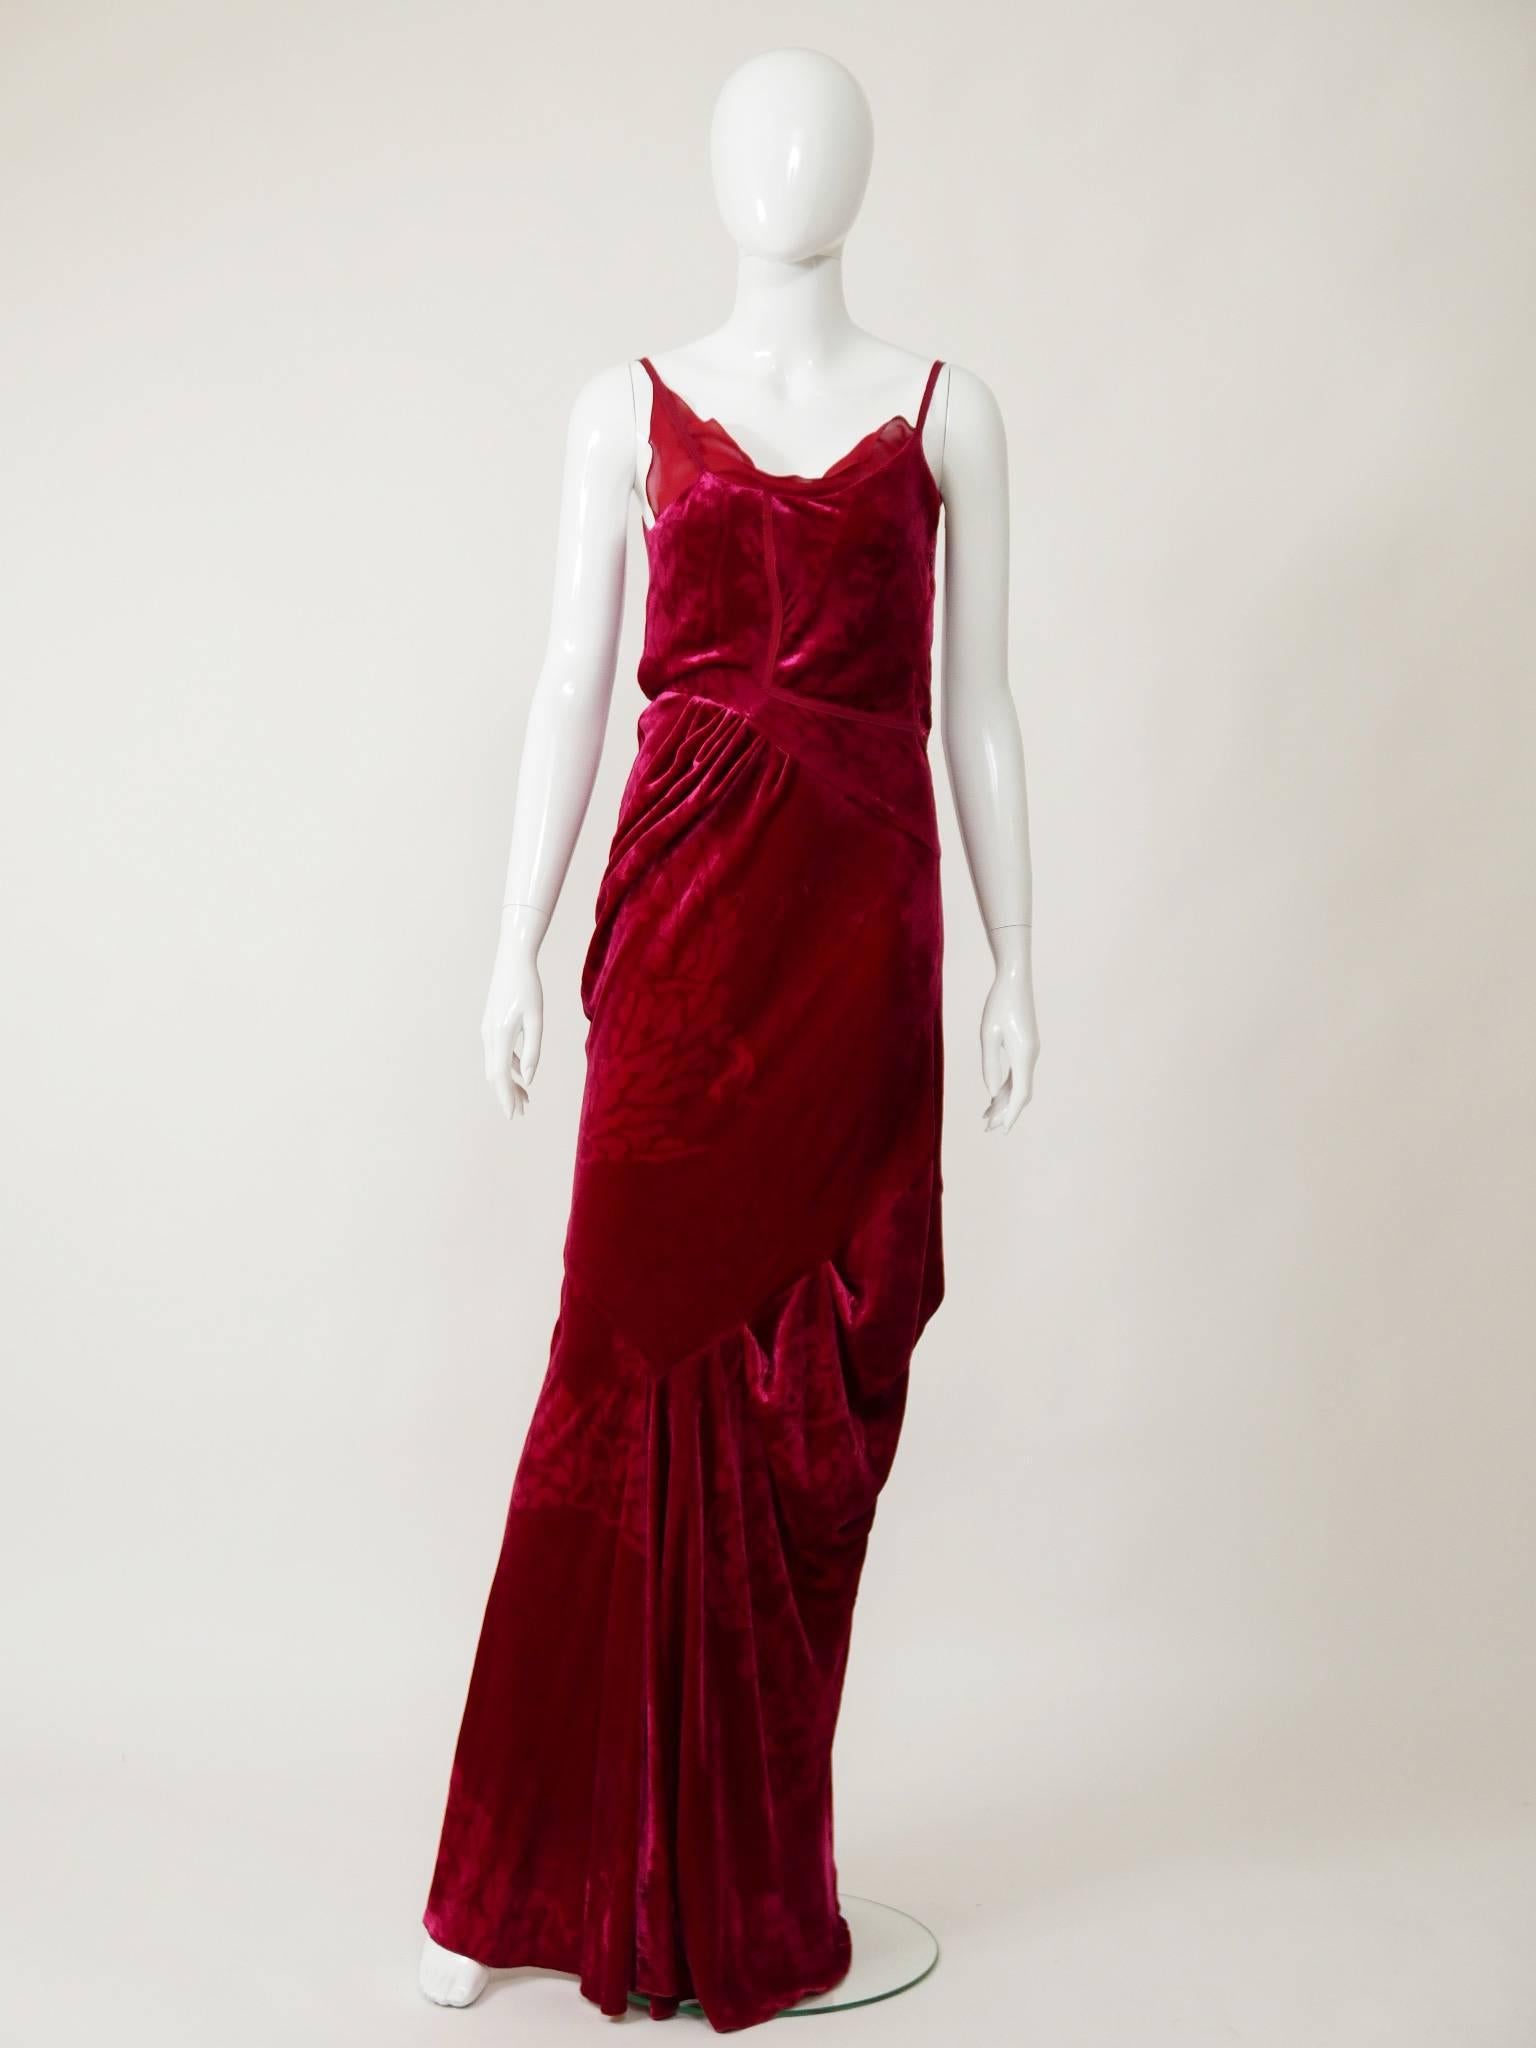 This fabulous Christian Dior dress is in red silk brocade velvet fabric. It's from Fall/Winter 2006 Collection

Very good vintage condition. 

Label: Dior  
Fabric: silk
Color: red

Measurement:
Estimeted Size S
Bust 34 inch
Waist 26